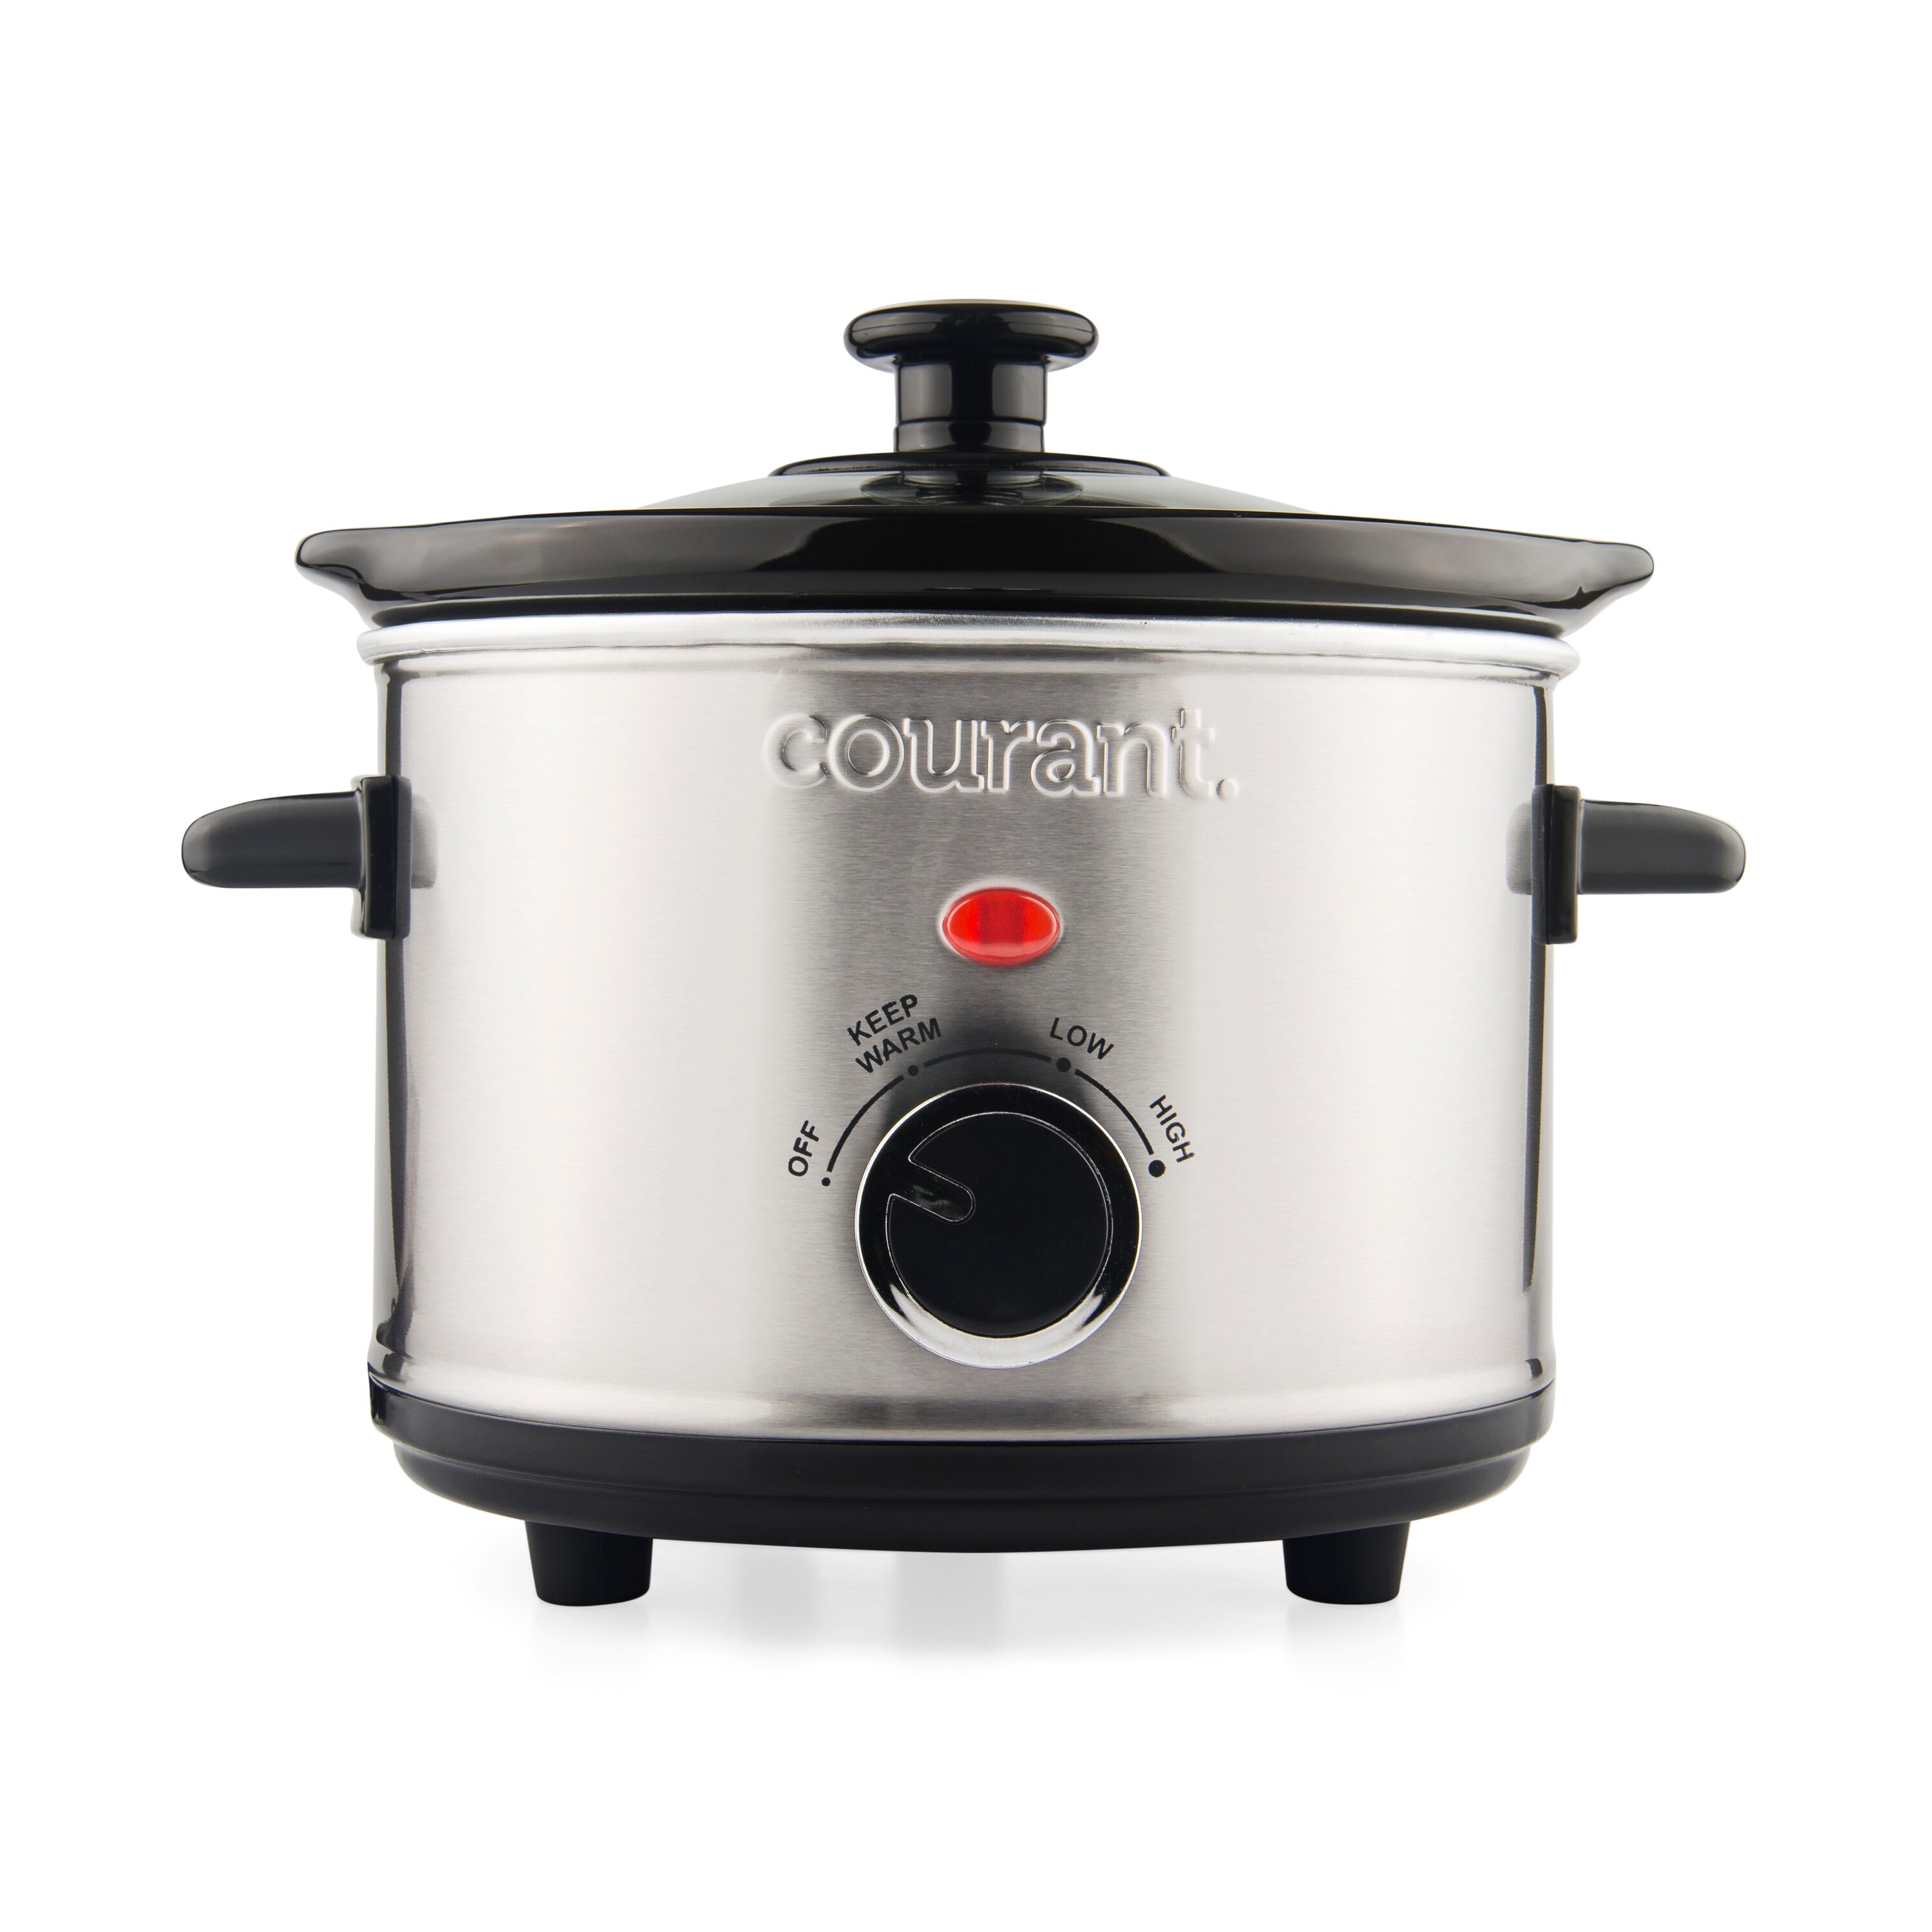 Courant 2.5 qt. Slow Cooker with Keep Warm Settings and Removable